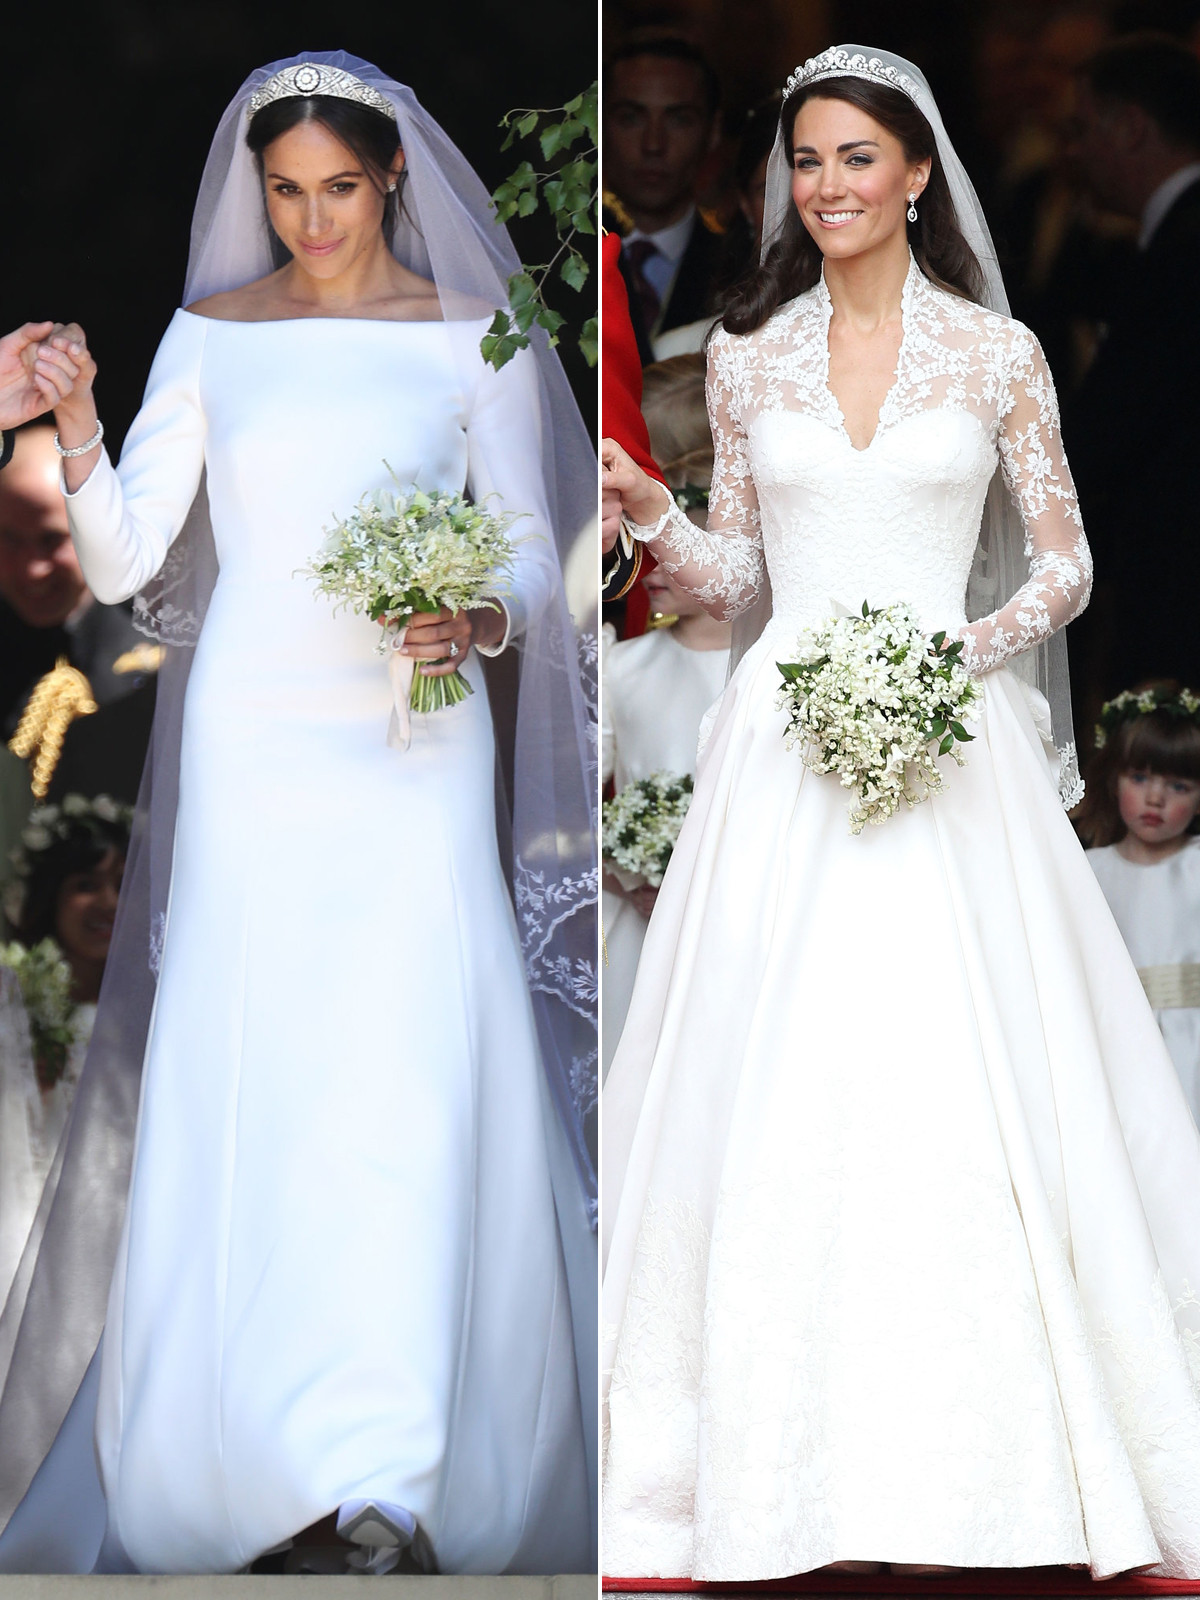 Kate Middleton Wedding Gown
 Meghan Markle and Kate Middleton s Wedding Gowns